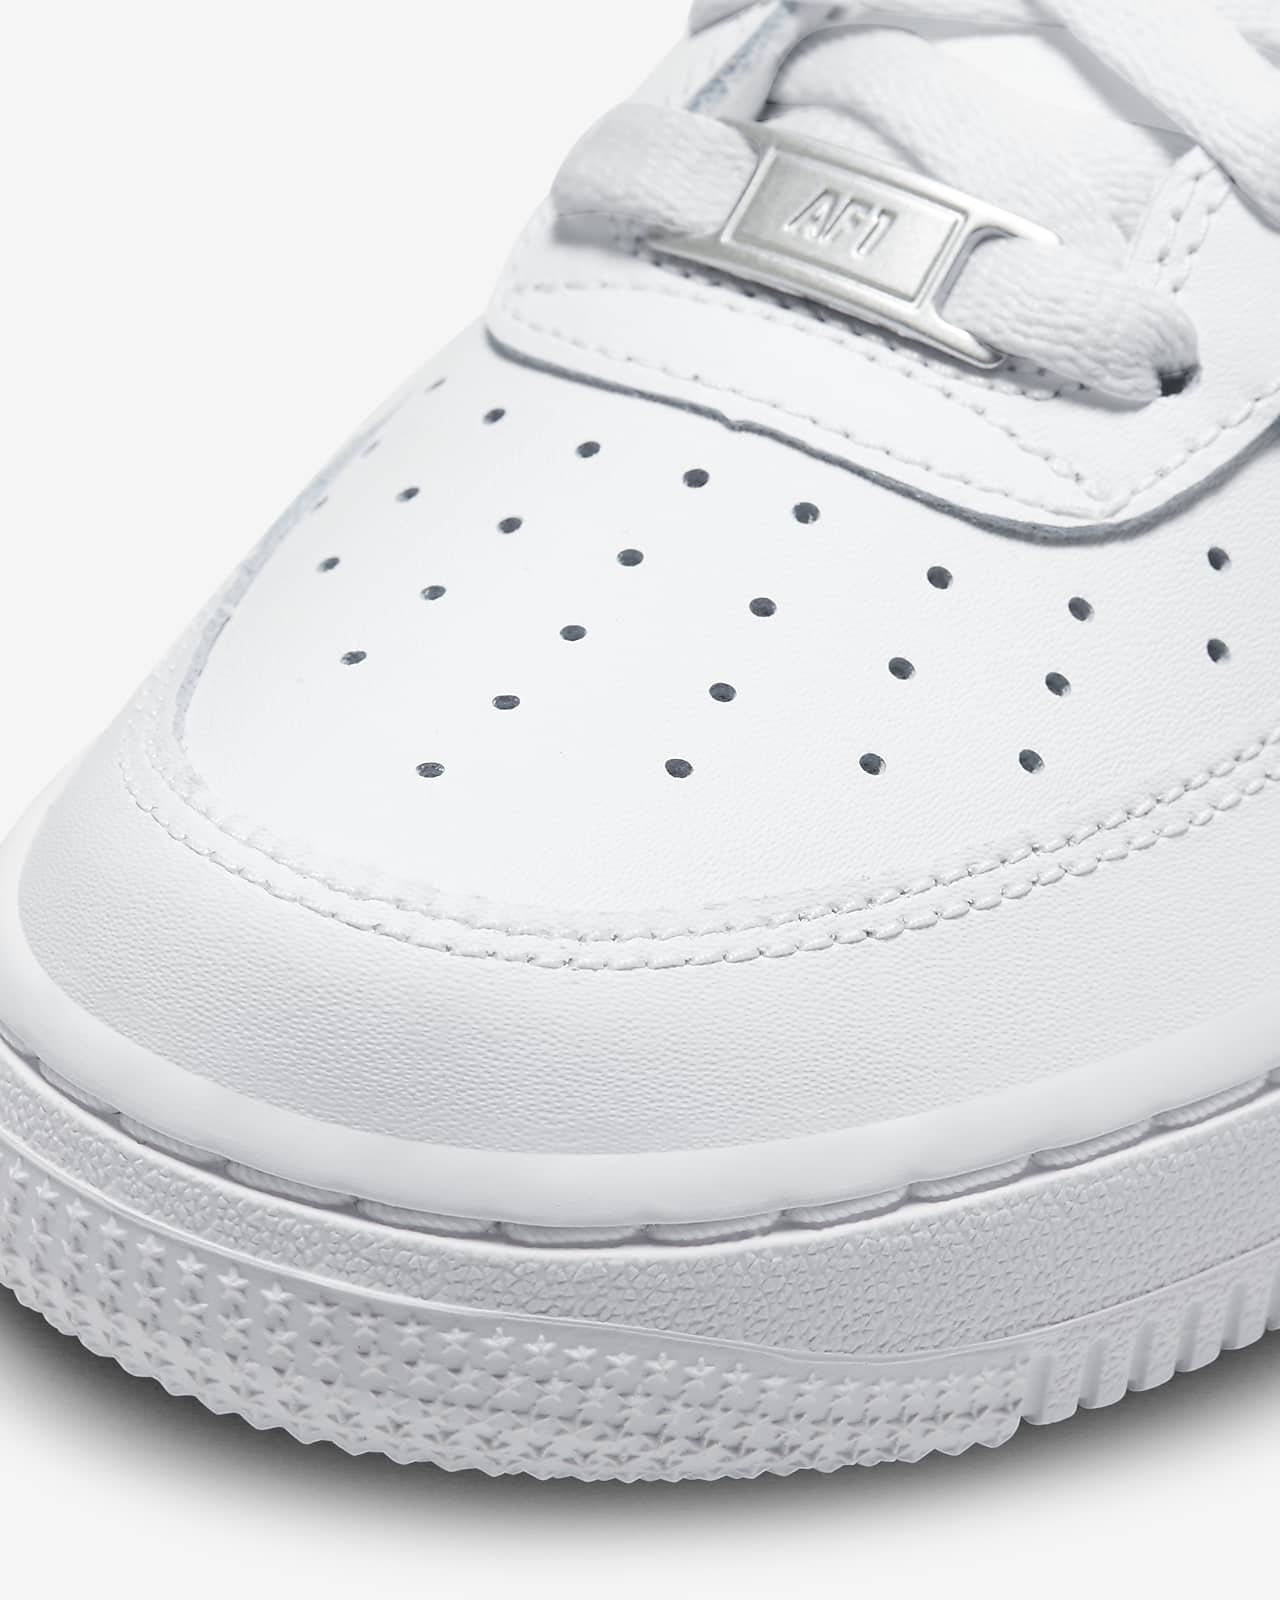 Nike Air Force 1 LE Older Kids' Shoe مرايه حائط